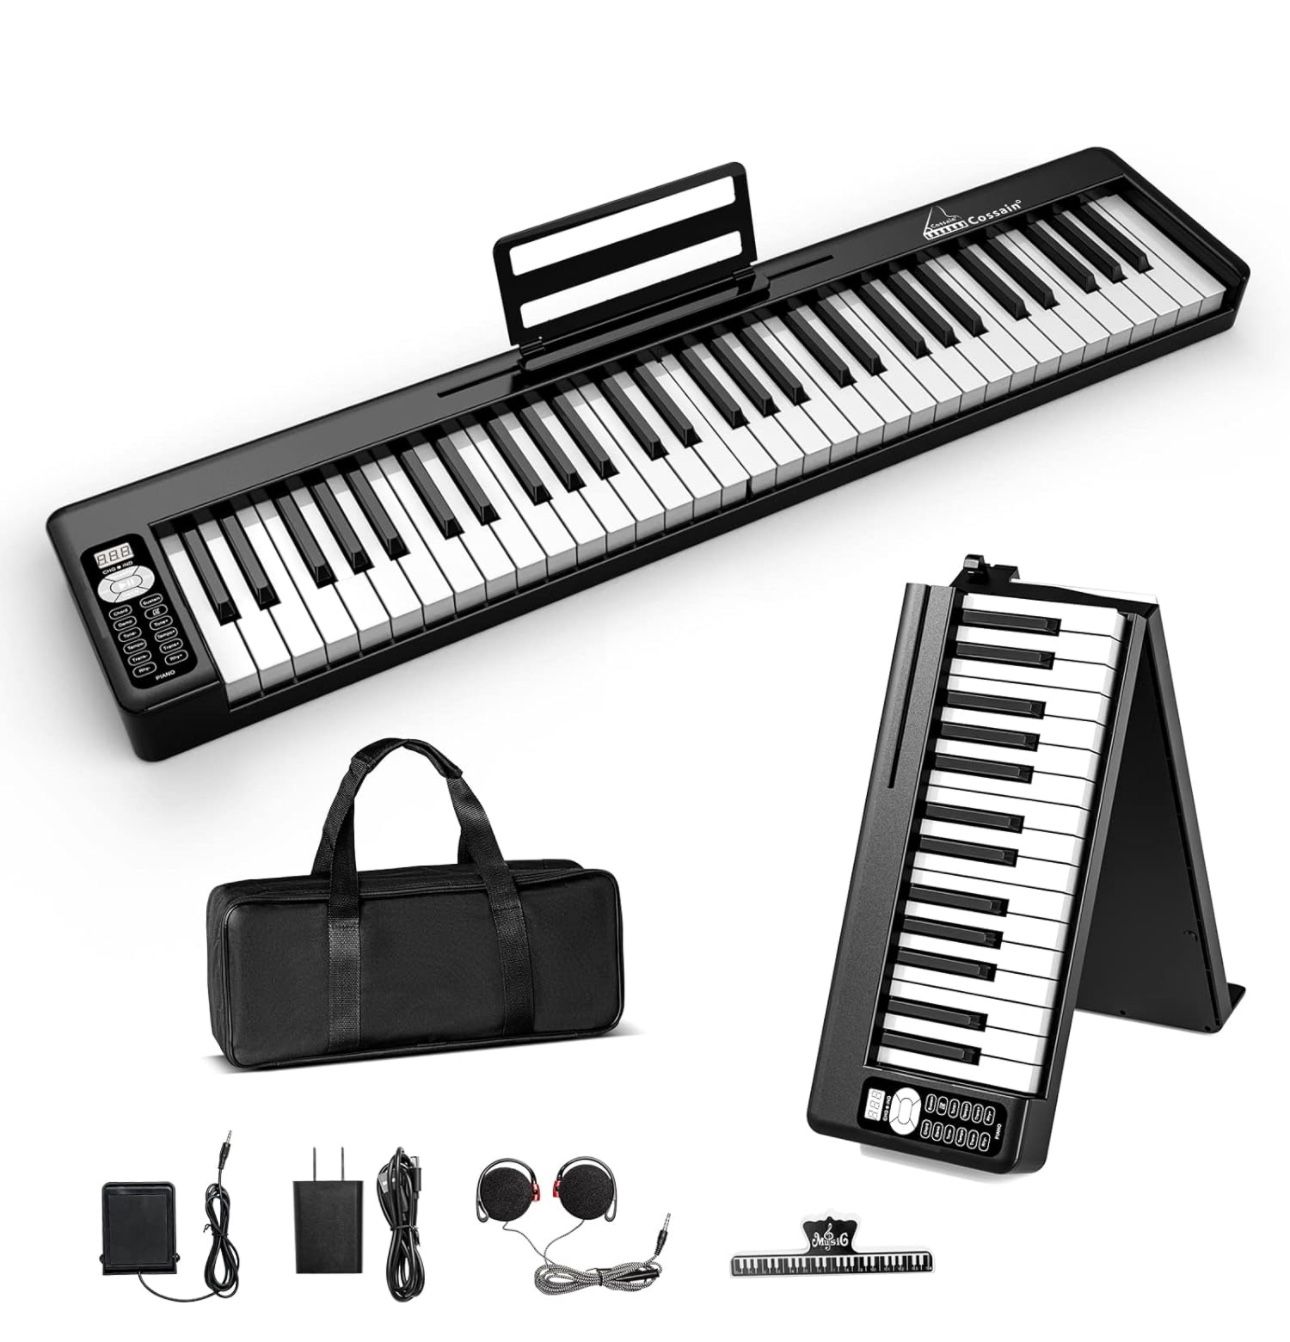 Piano Keyboard 61 Keys, Folding Digital Piano with Bluetooth [Rechargeable/Touch Sensitive/Semi-Weighted] Portable Piano Keyboard for Beginners, Teens